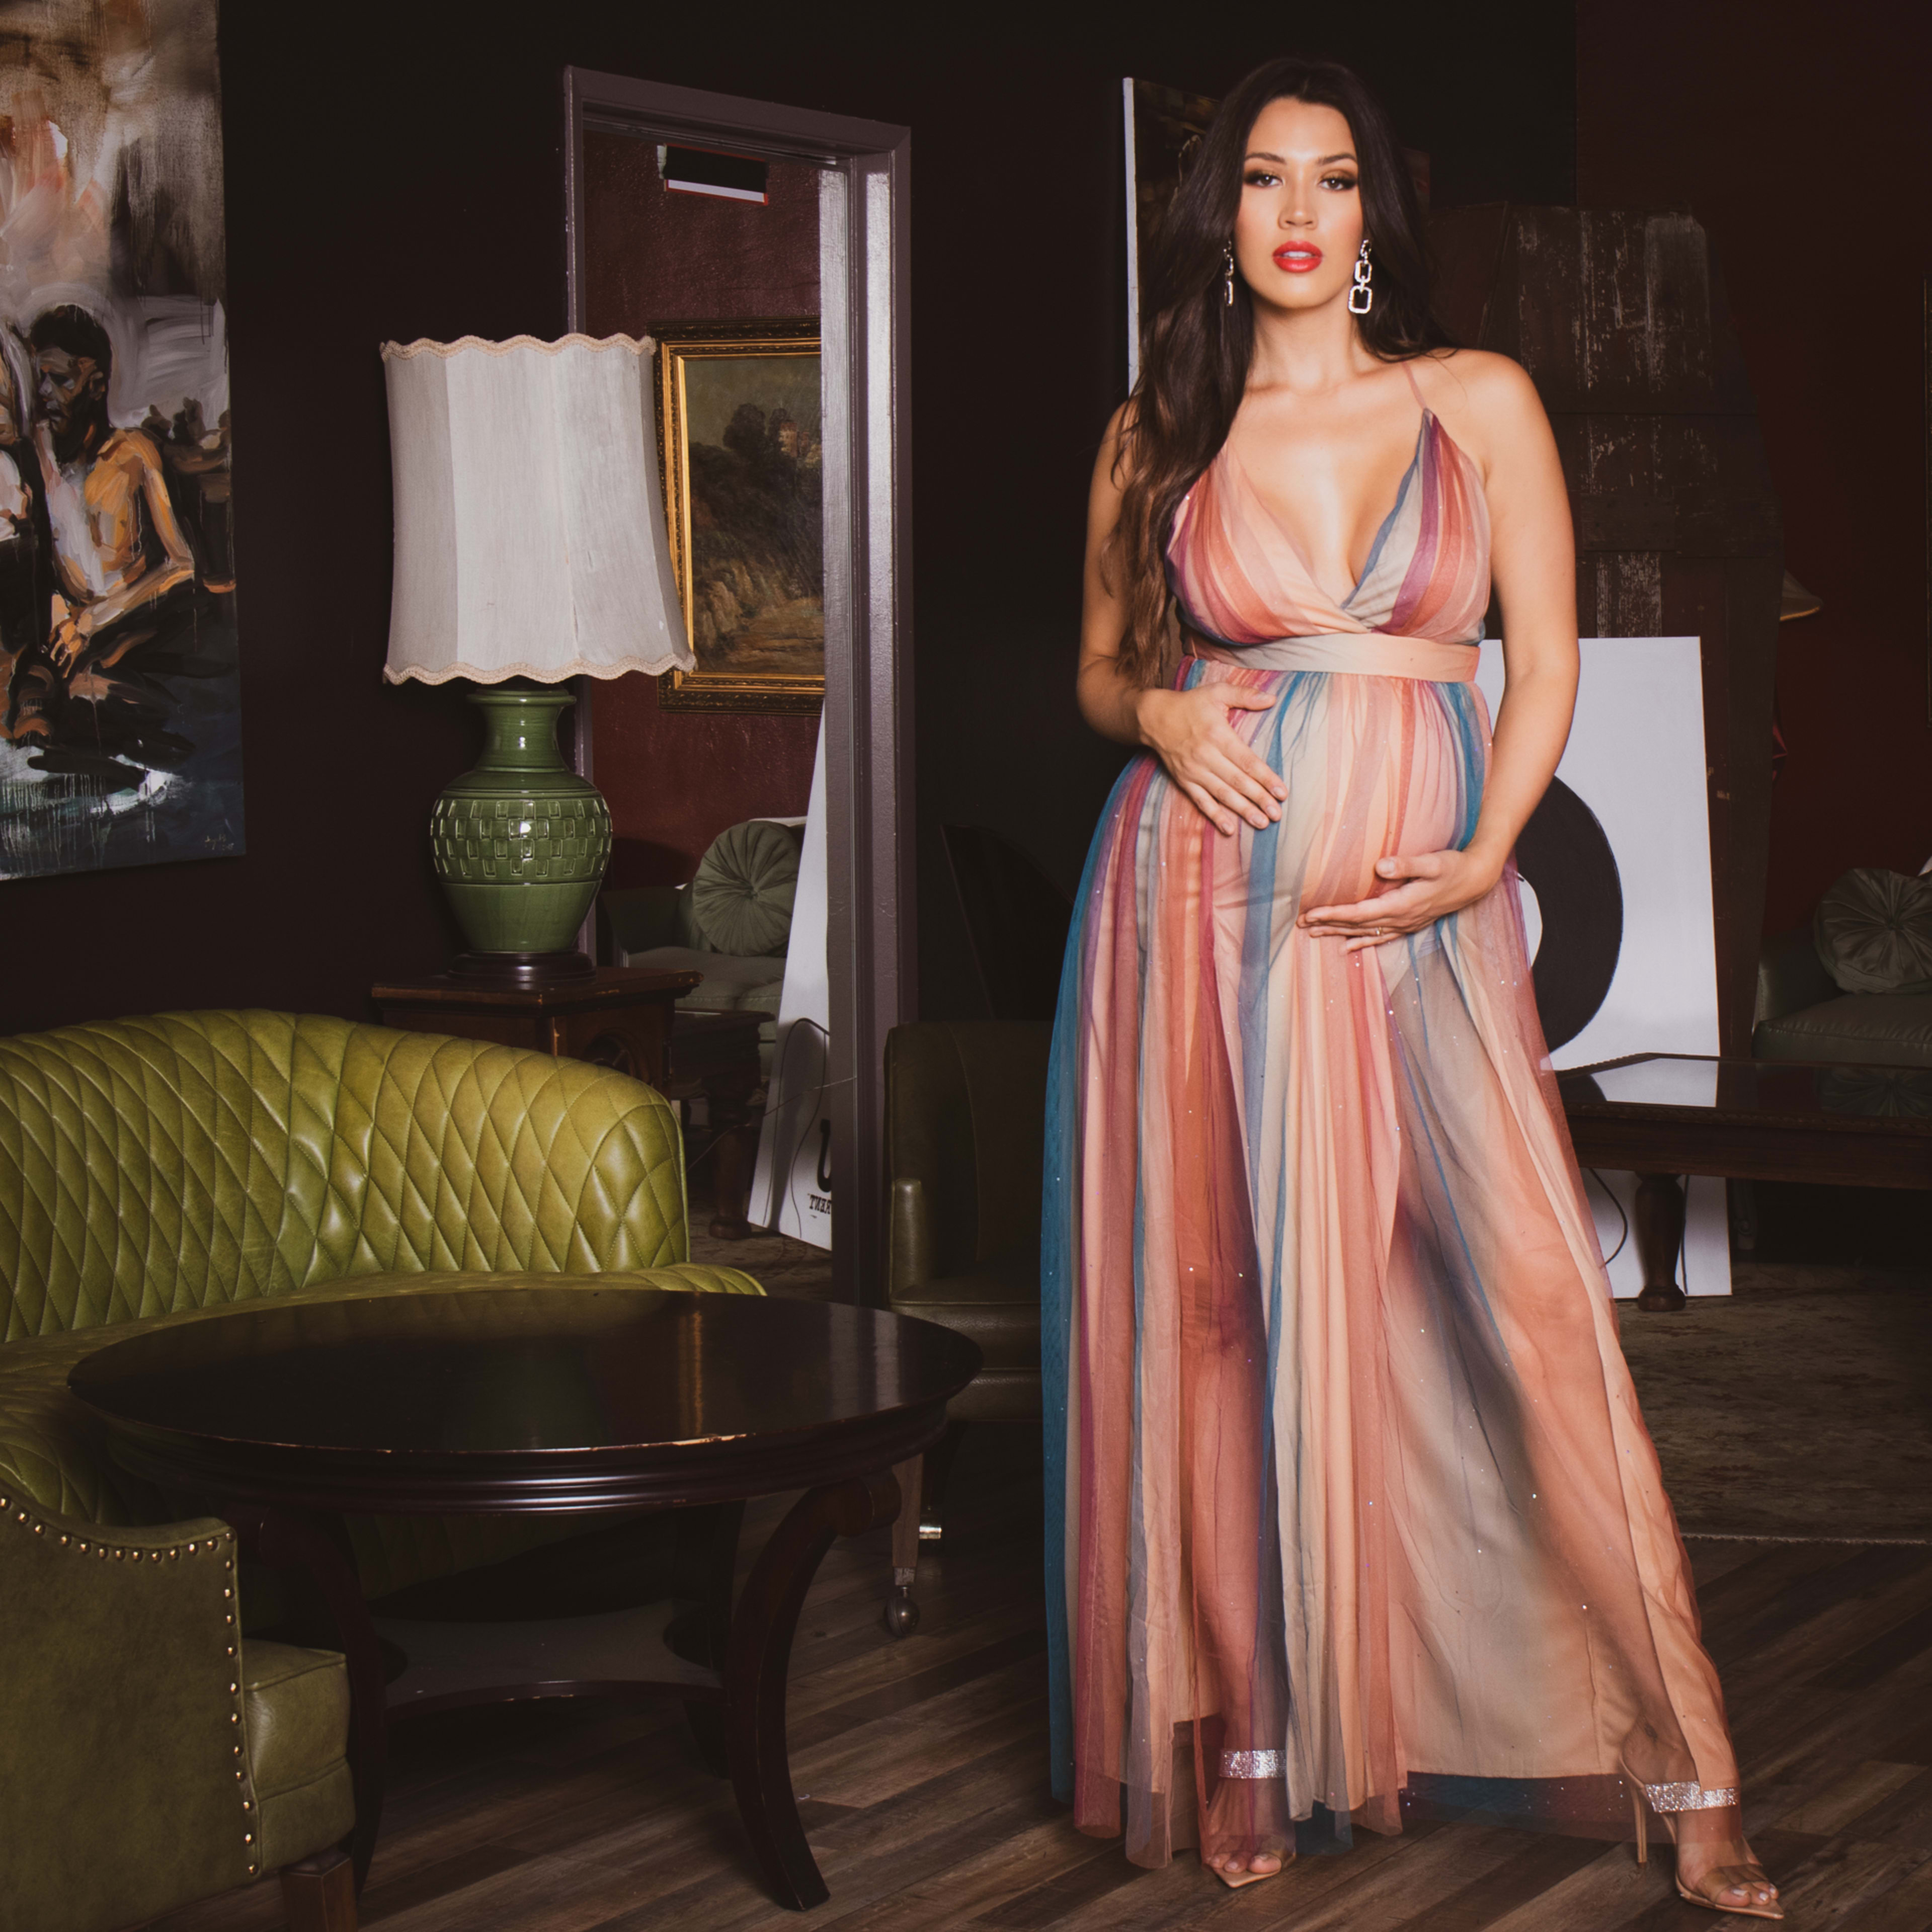 A maternity photoshoot of a woman in a dress holding her belly in a living room.